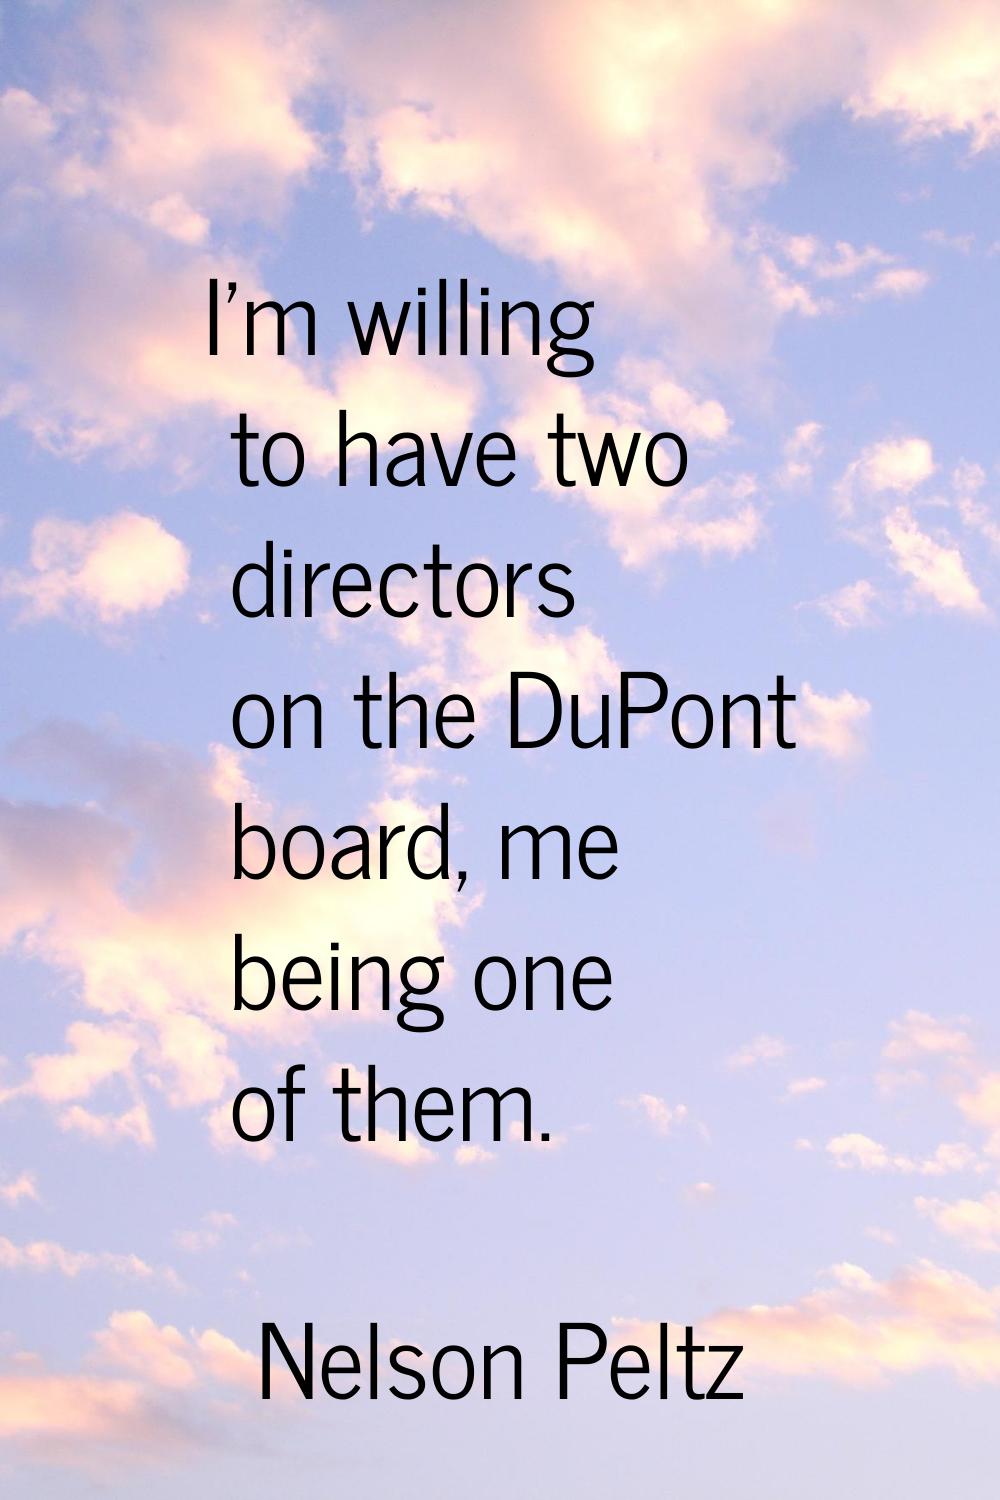 I'm willing to have two directors on the DuPont board, me being one of them.